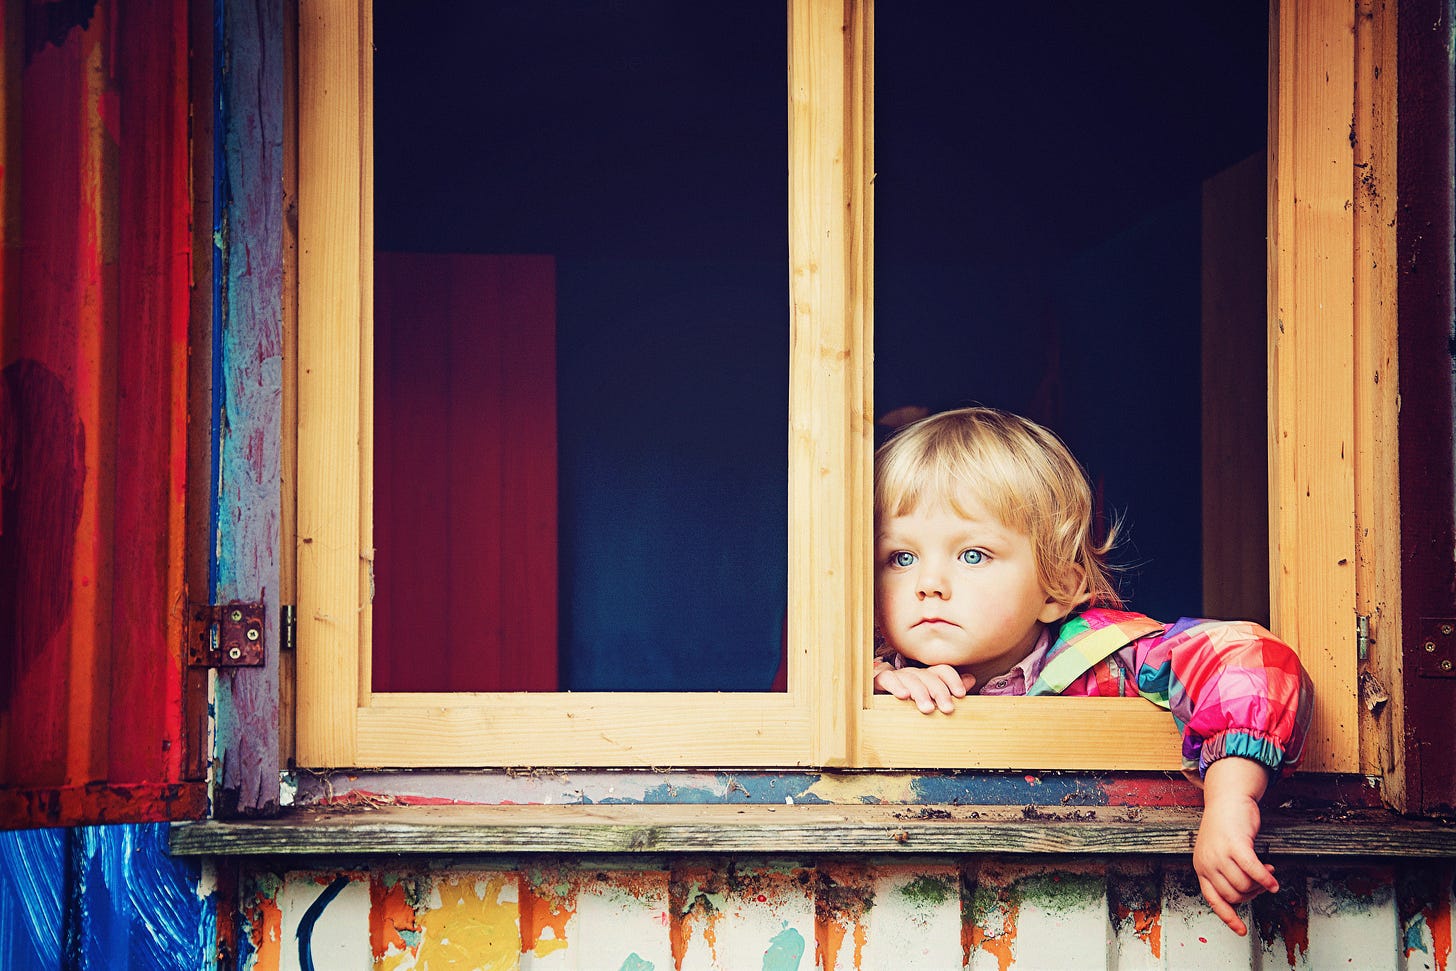 Young child sat at an open window looking longingly, sad